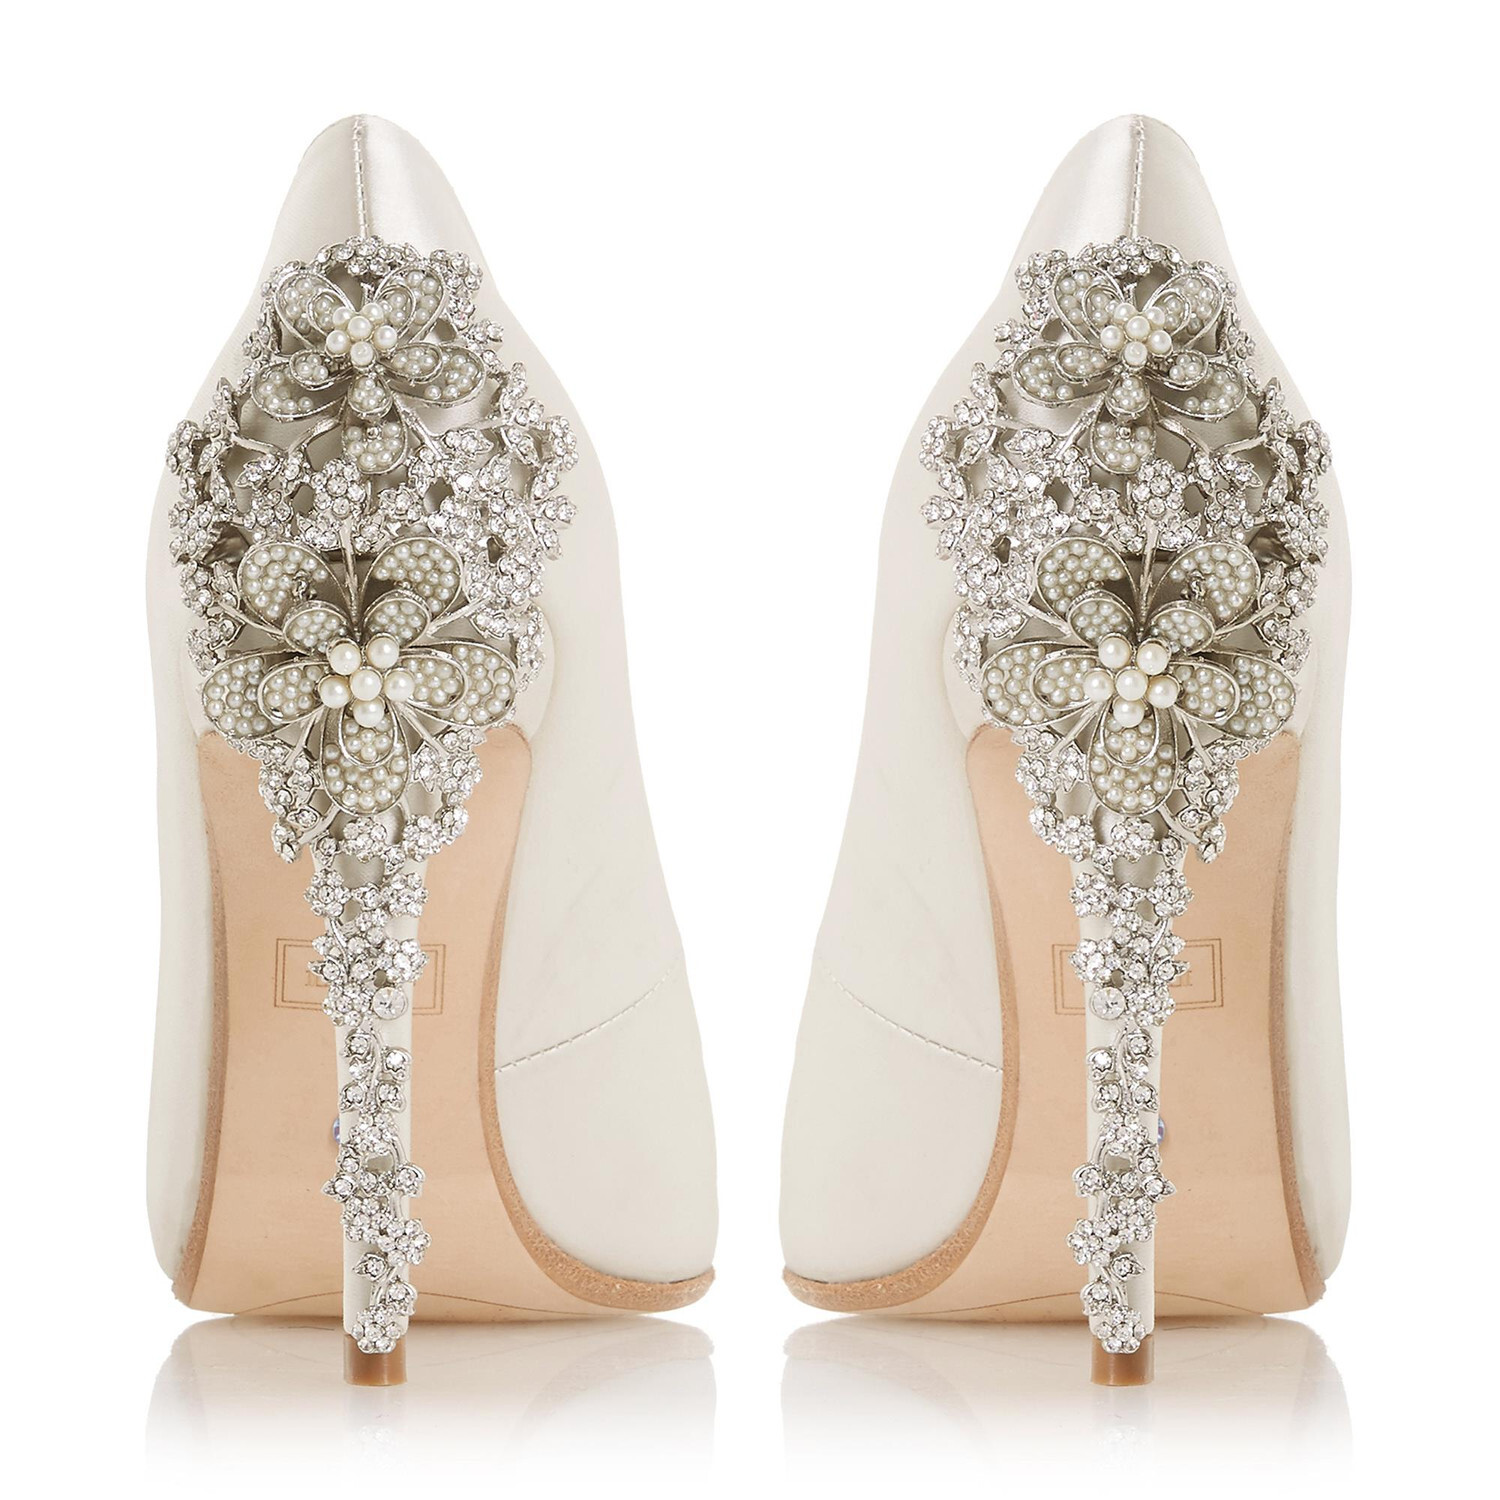 BeWed Wedding Shoes from Dune London - hitched.co.uk